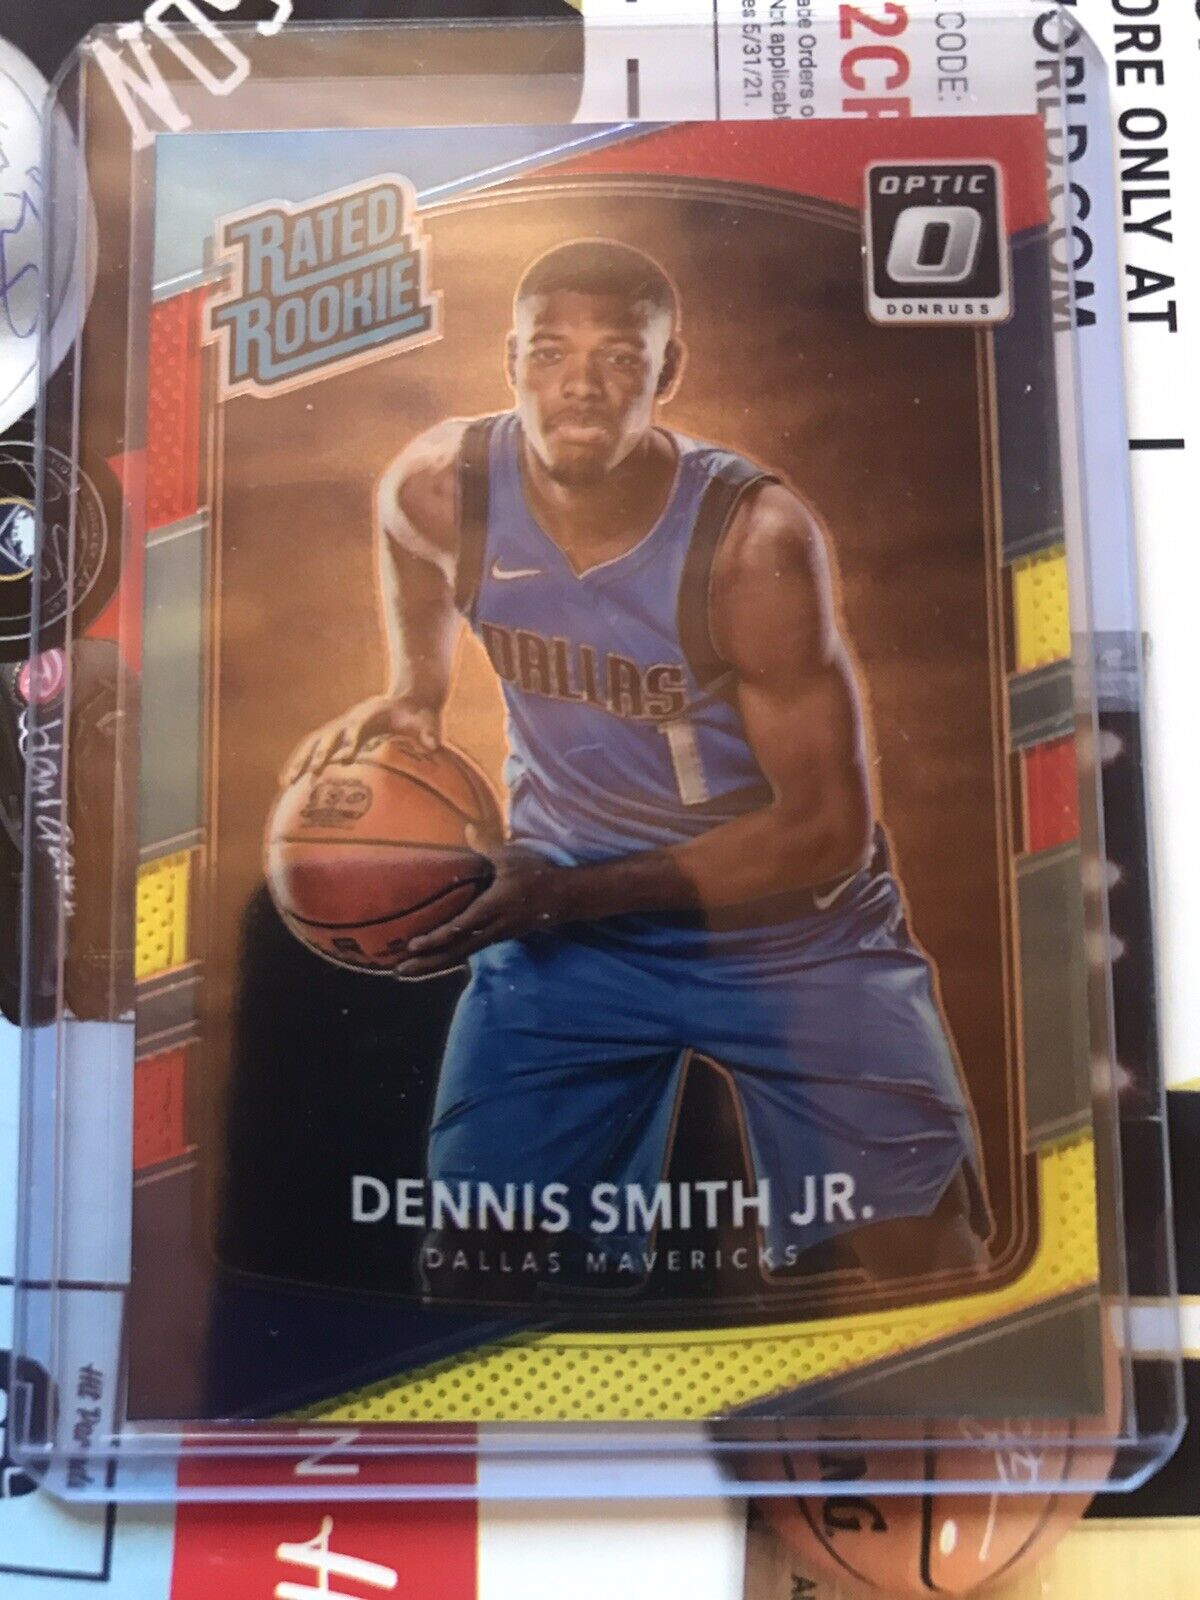 2017-18 Donruss Optic Dennis Smith Jr. Red & Yellow Rated Rookie RC